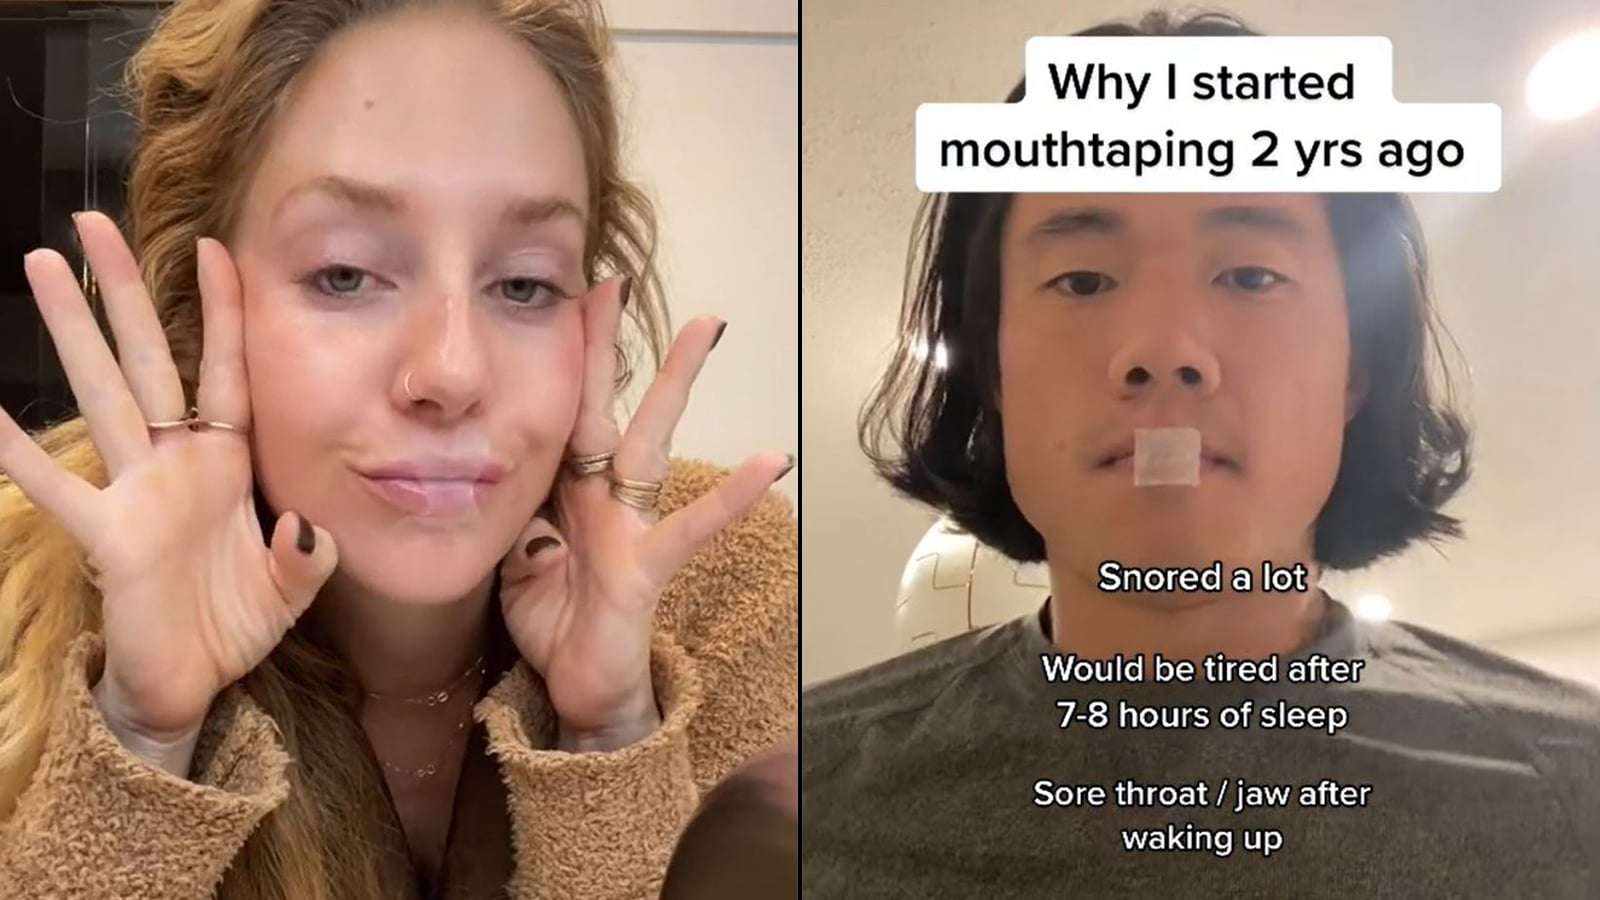 Experts warn against tiktok mouth taping trend